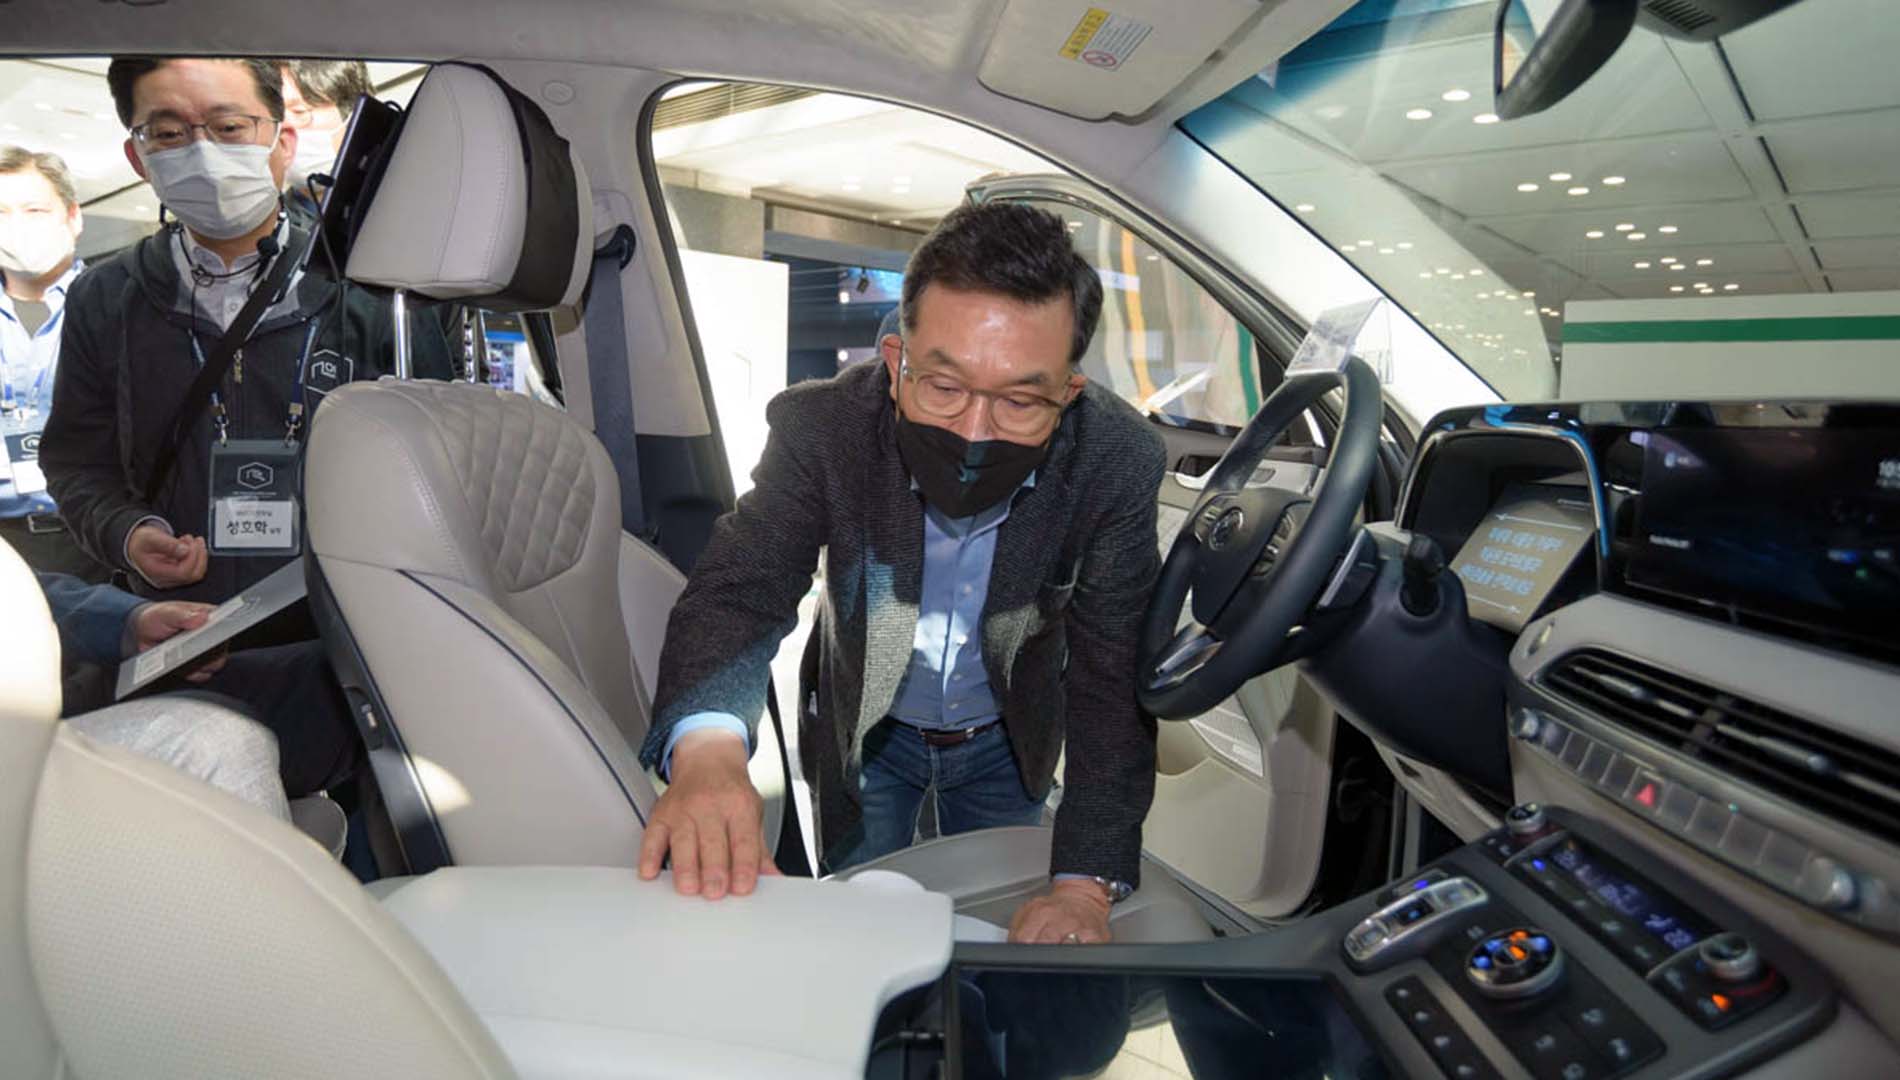 MIRUM® featured at Hyundai Open Innovation Lounge event in Korea